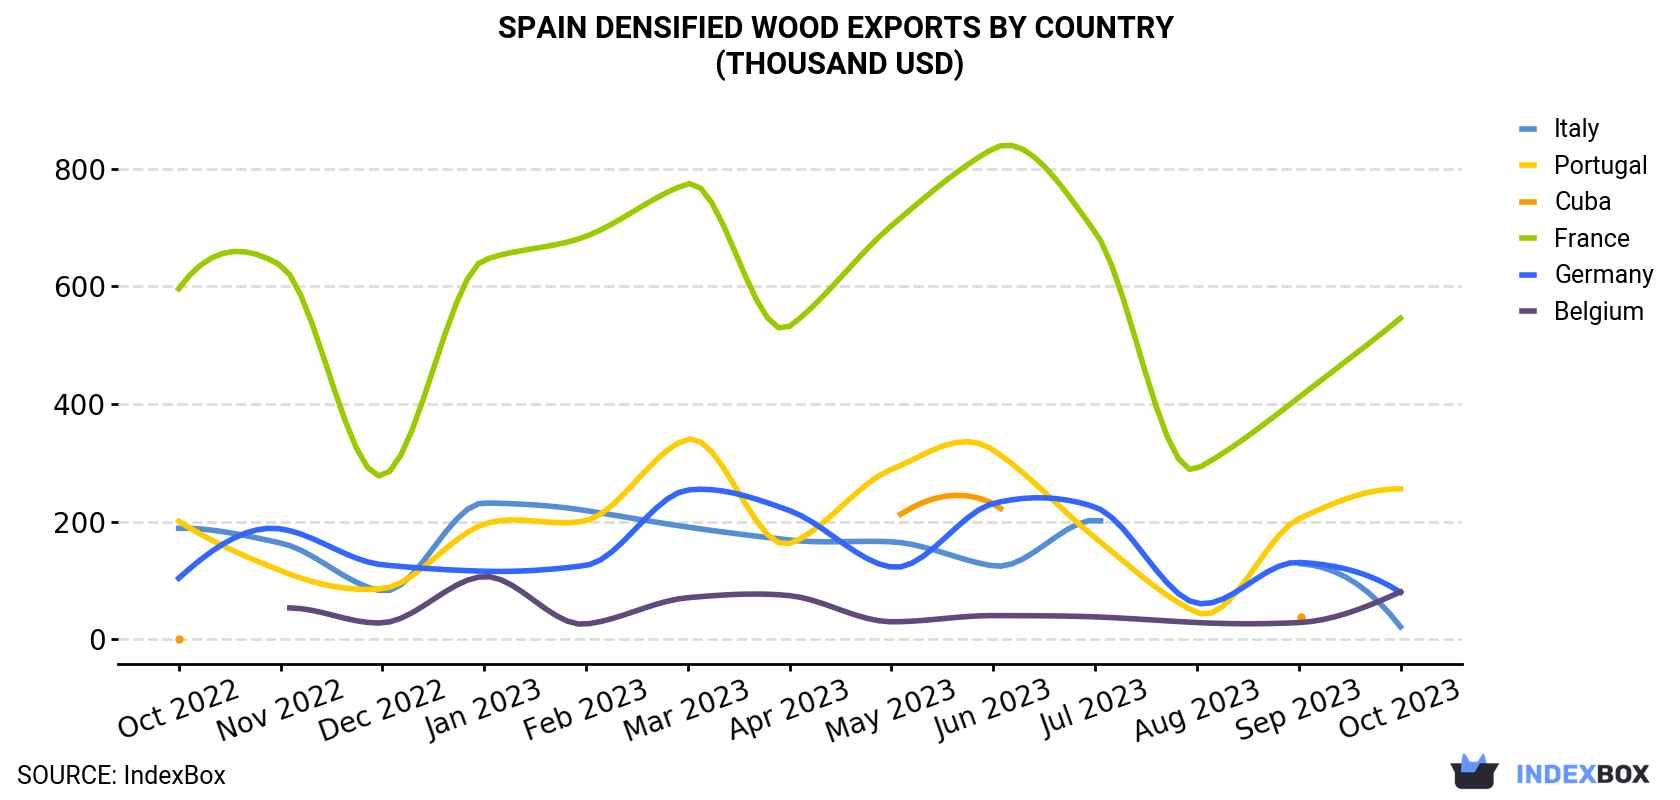 Spain Densified Wood Exports By Country (Thousand USD)